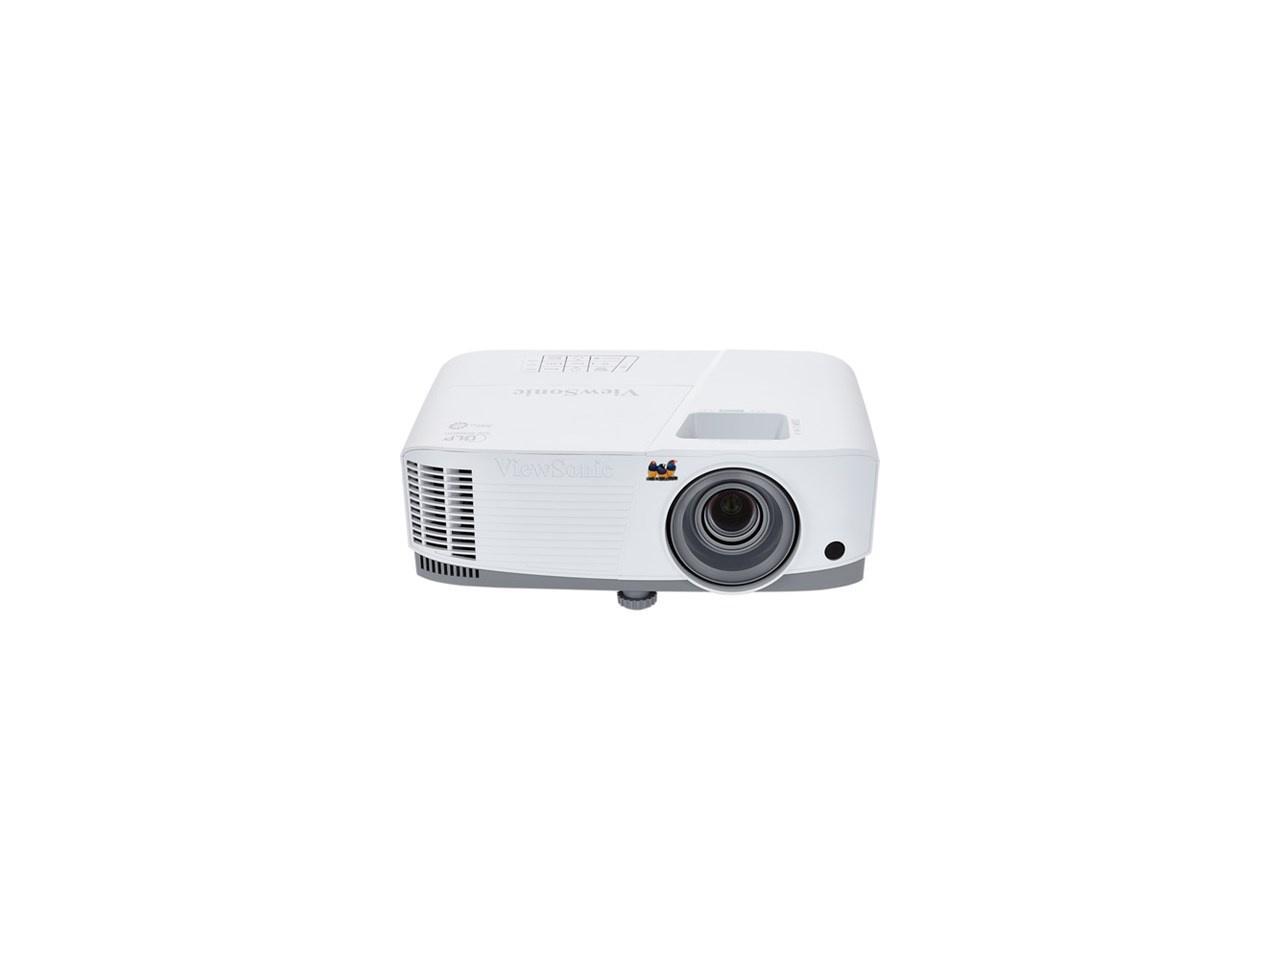 Viewsonic - PA503X - Viewsonic PA503X 3D Ready DLP Projector - 4:3 - 1024 x 768 - Front, Ceiling - 720p - 4500 Hour